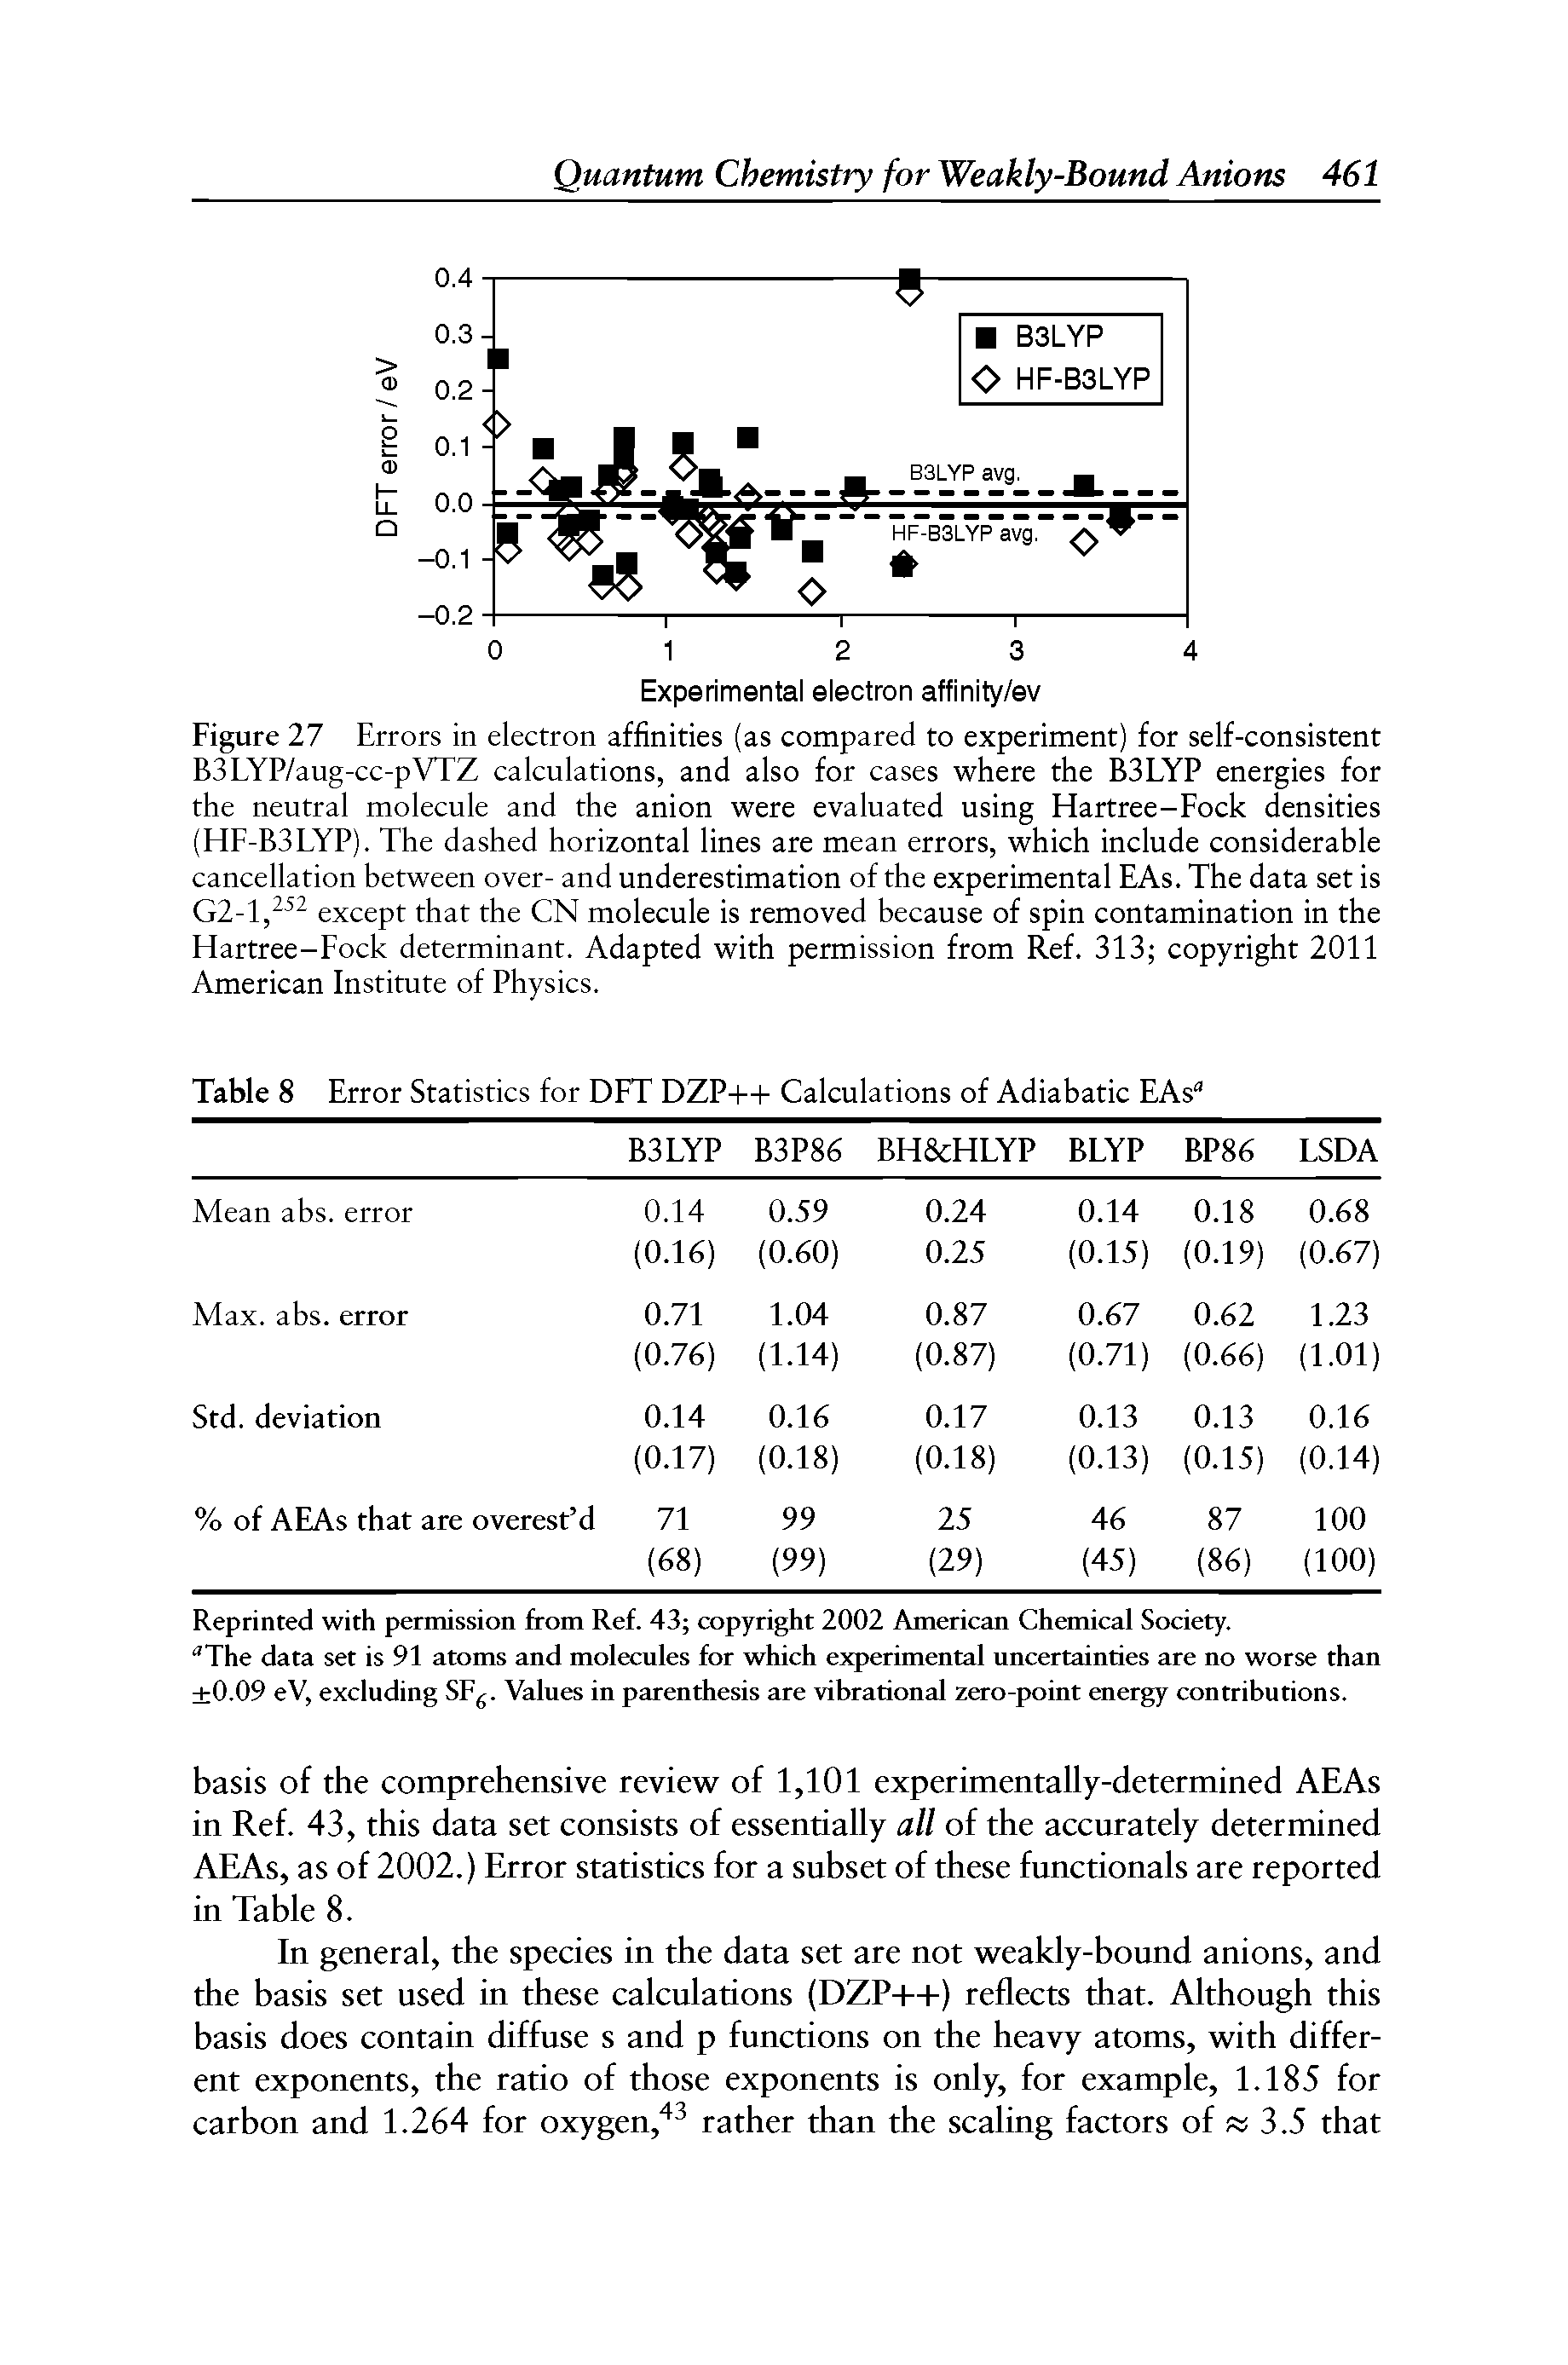 Figure 27 Errors in electron affinities (as compared to experiment) for self-consistent B3LYP/aug-cc-pVTZ calculations, and also for cases where the B3LYP energies for the neutral molecule and the anion were evaluated using Hartree-Fock densities (HF-B3LYP). The dashed horizontal lines are mean errors, which include considerable cancellation between over- and underestimation of the experimental EAs. The data set is except that the CN molecule is removed because of spin contamination in the Hartree-Fock determinant. Adapted with permission from Ref. 313 copyright 2011 American Institute of Physics.